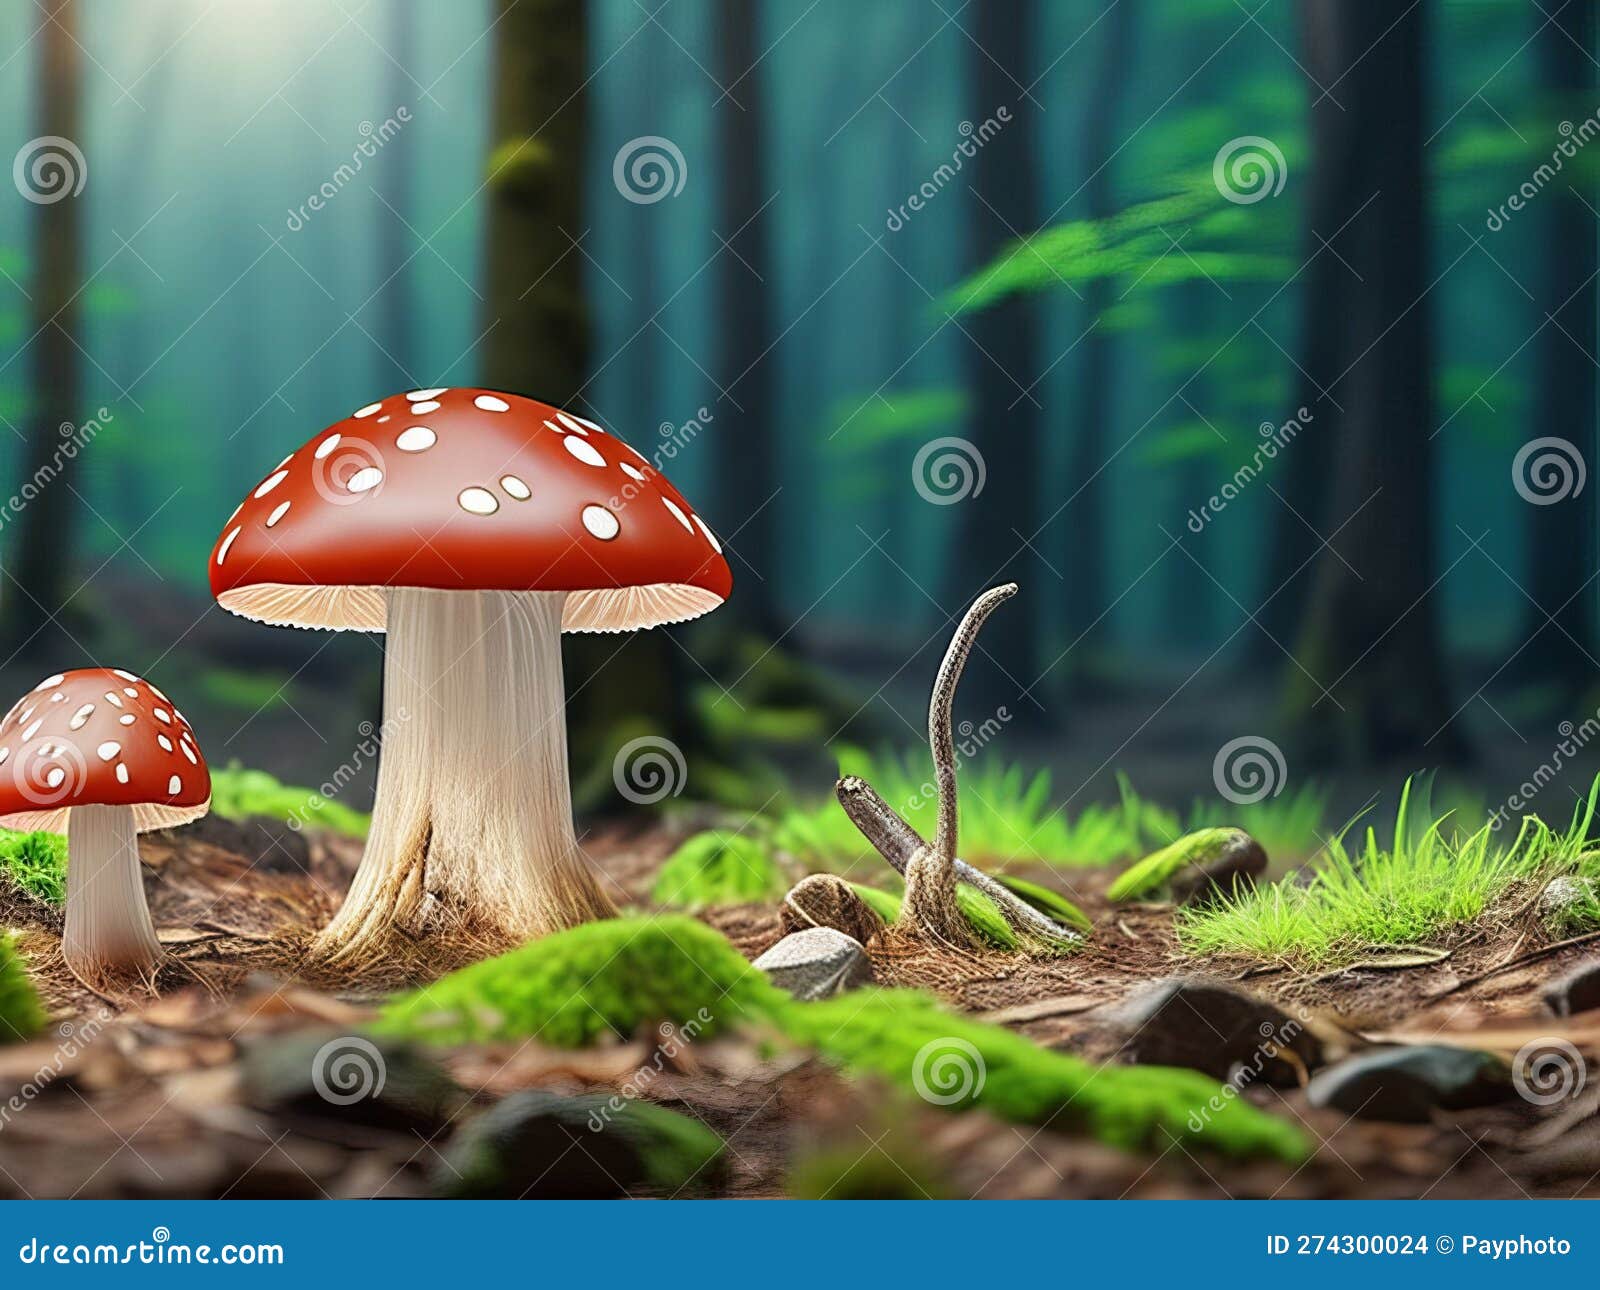 Discovering Magic Mushrooms in the Forest. Stock Illustration